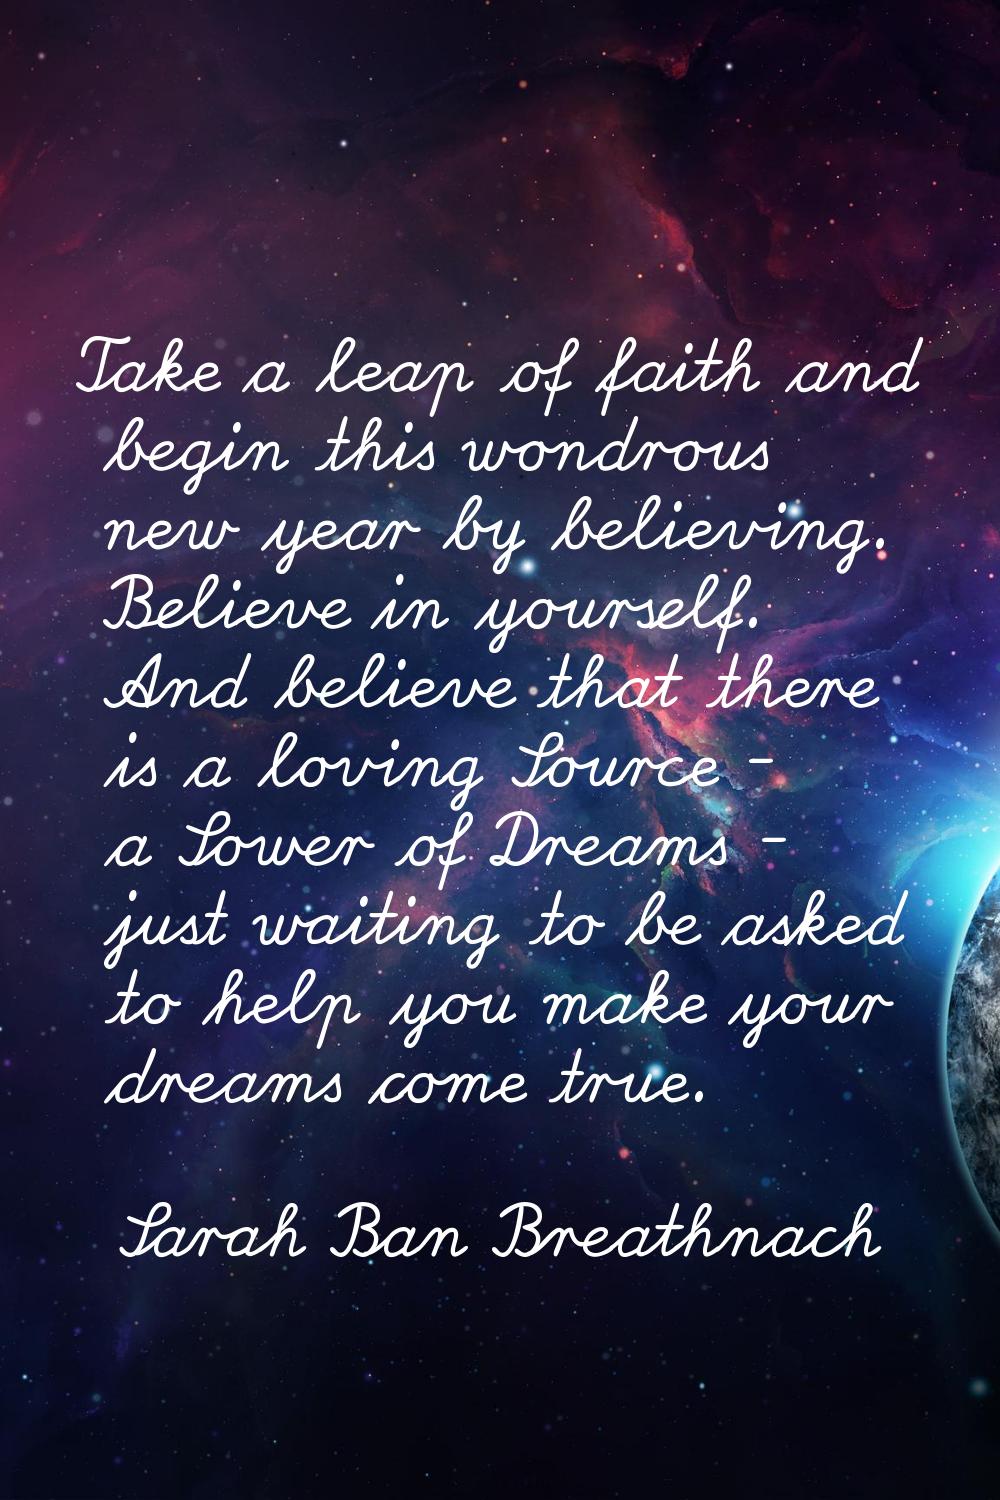 Take a leap of faith and begin this wondrous new year by believing. Believe in yourself. And believ